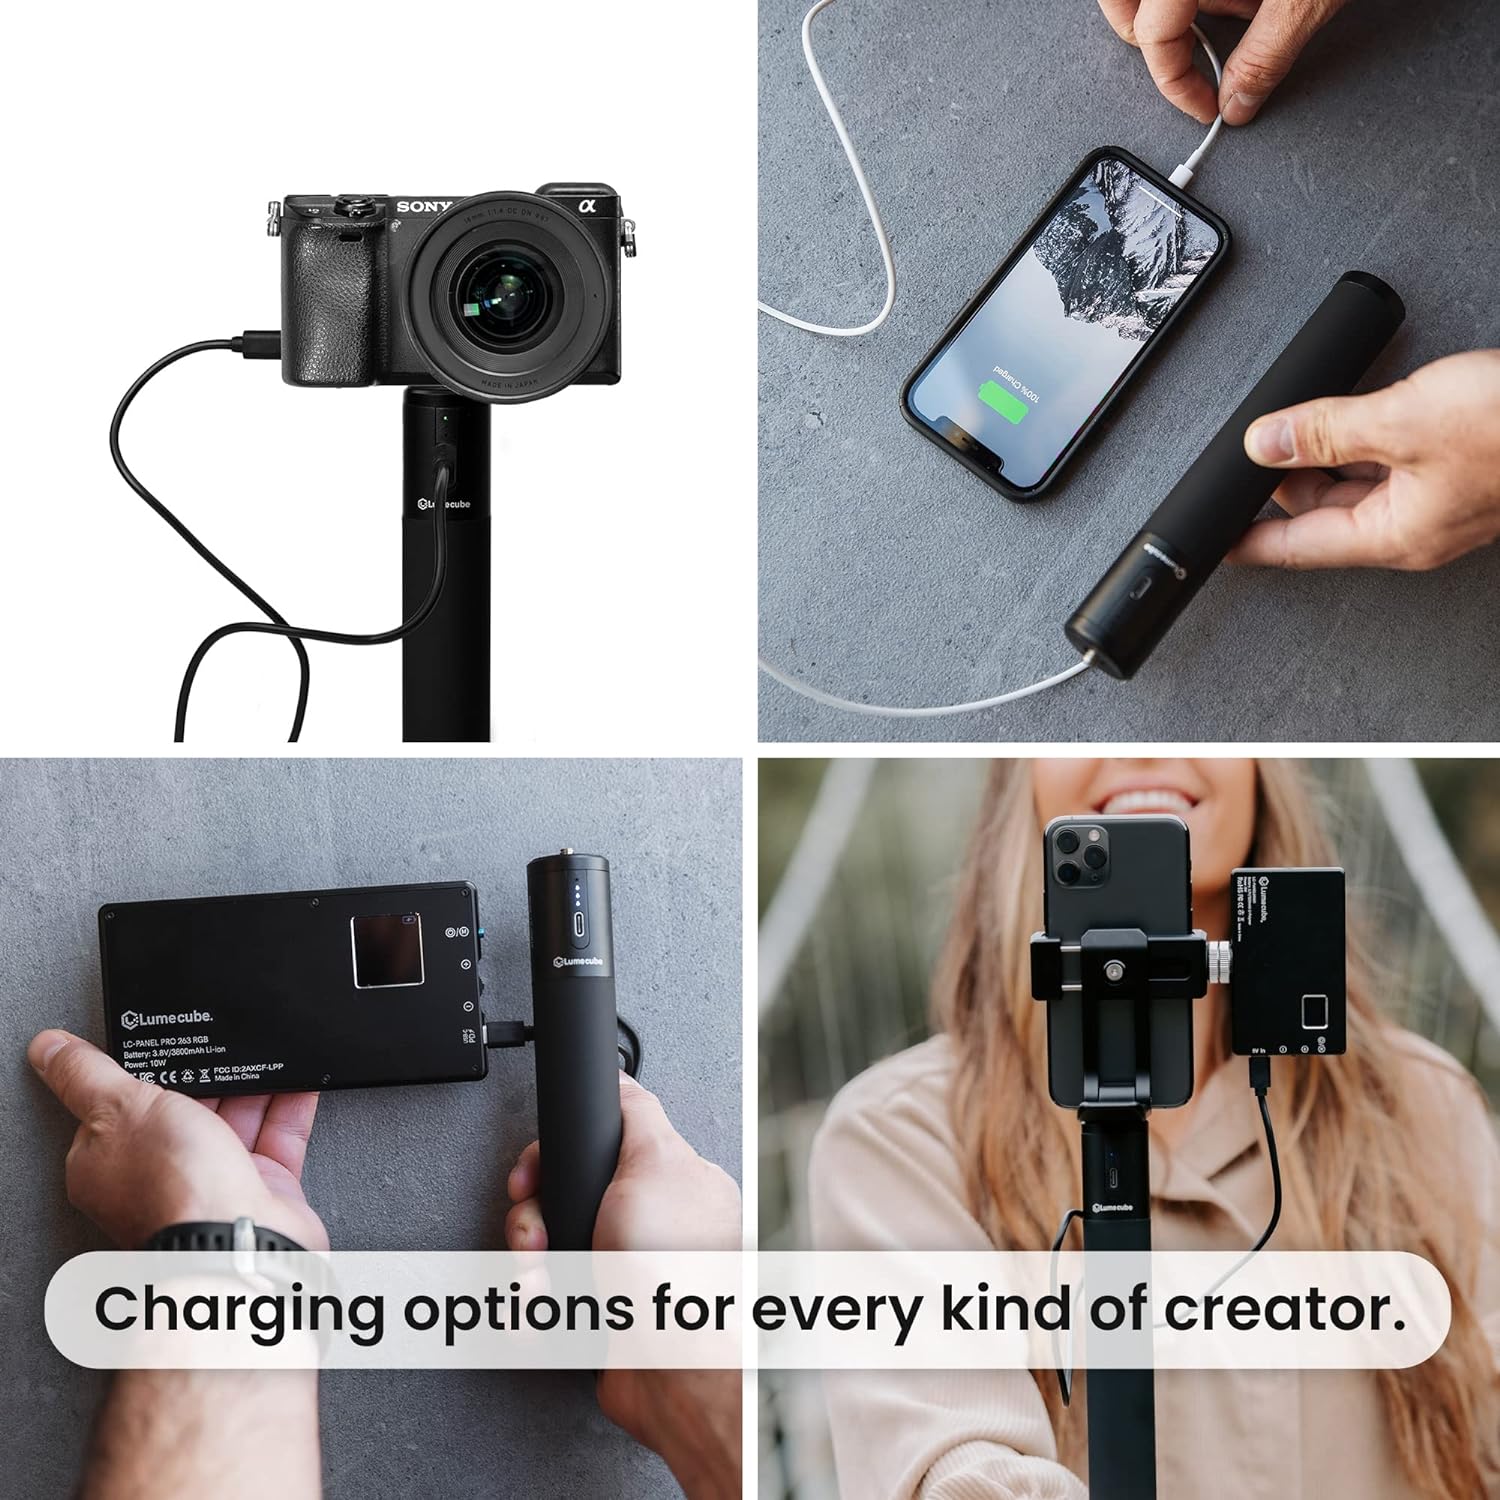 LUME CUBE Power Bank Grip | Portable Charger Handle for DSLR Camera, LED Lights, iPhone, Smartphones & GoPro | Portable Anti-Slip Rechargeable Battery Grip 10000mAh 5V/3A Input/Output